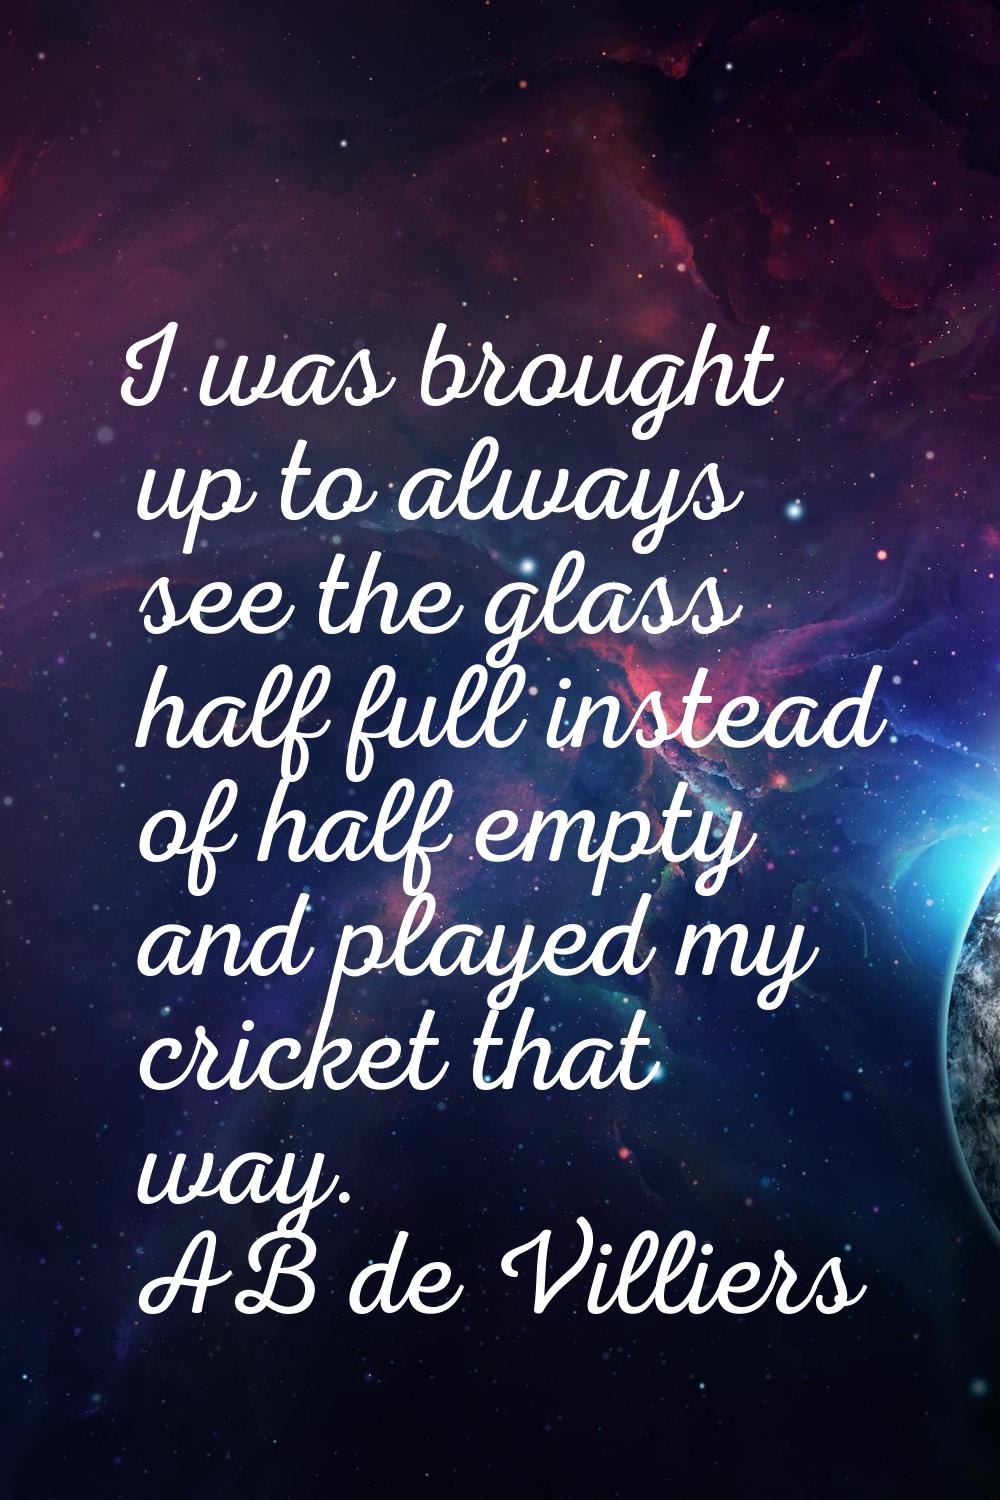 I was brought up to always see the glass half full instead of half empty and played my cricket that